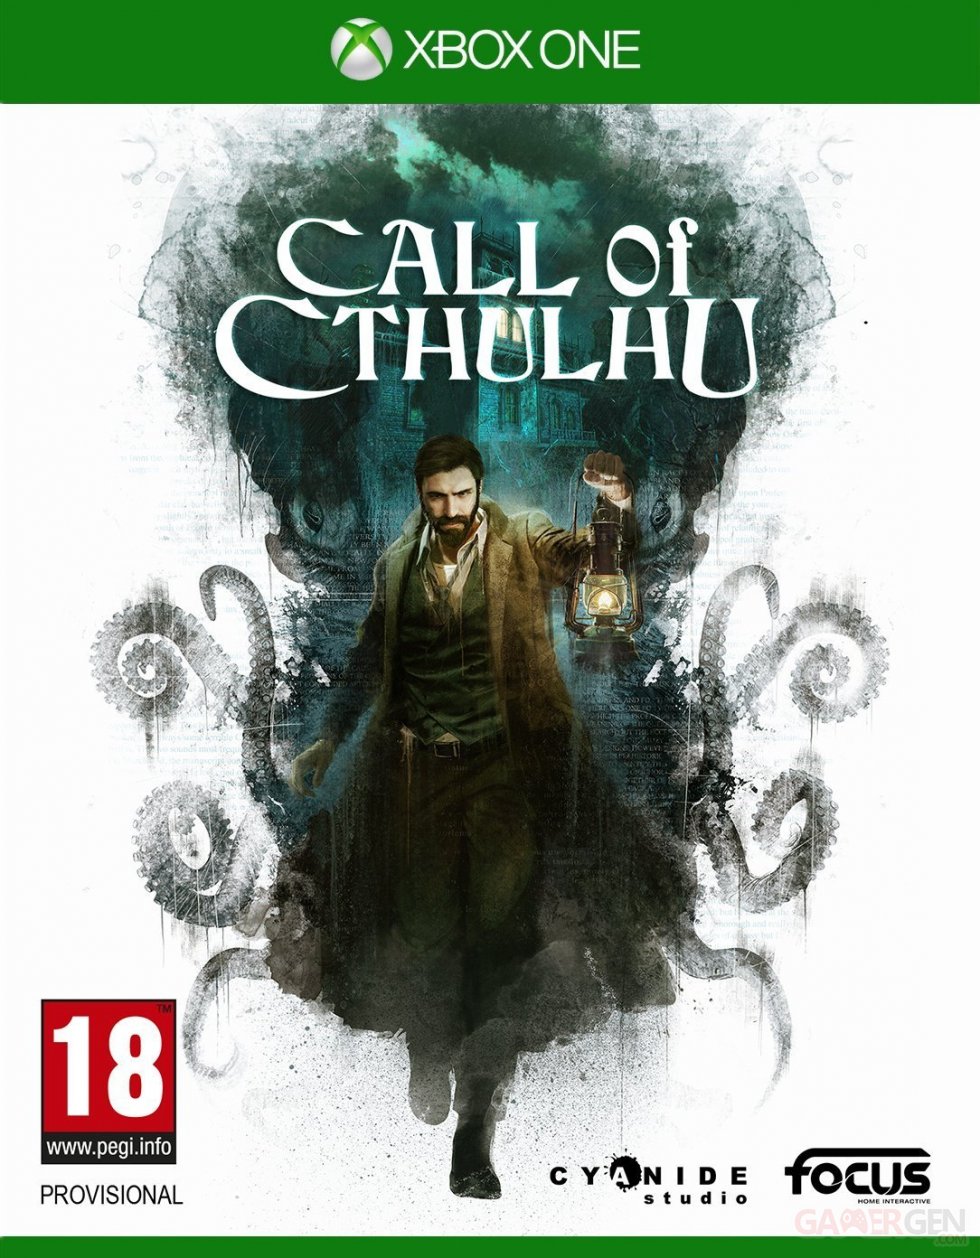 Call of Cthulhu Jaquette Xbox One